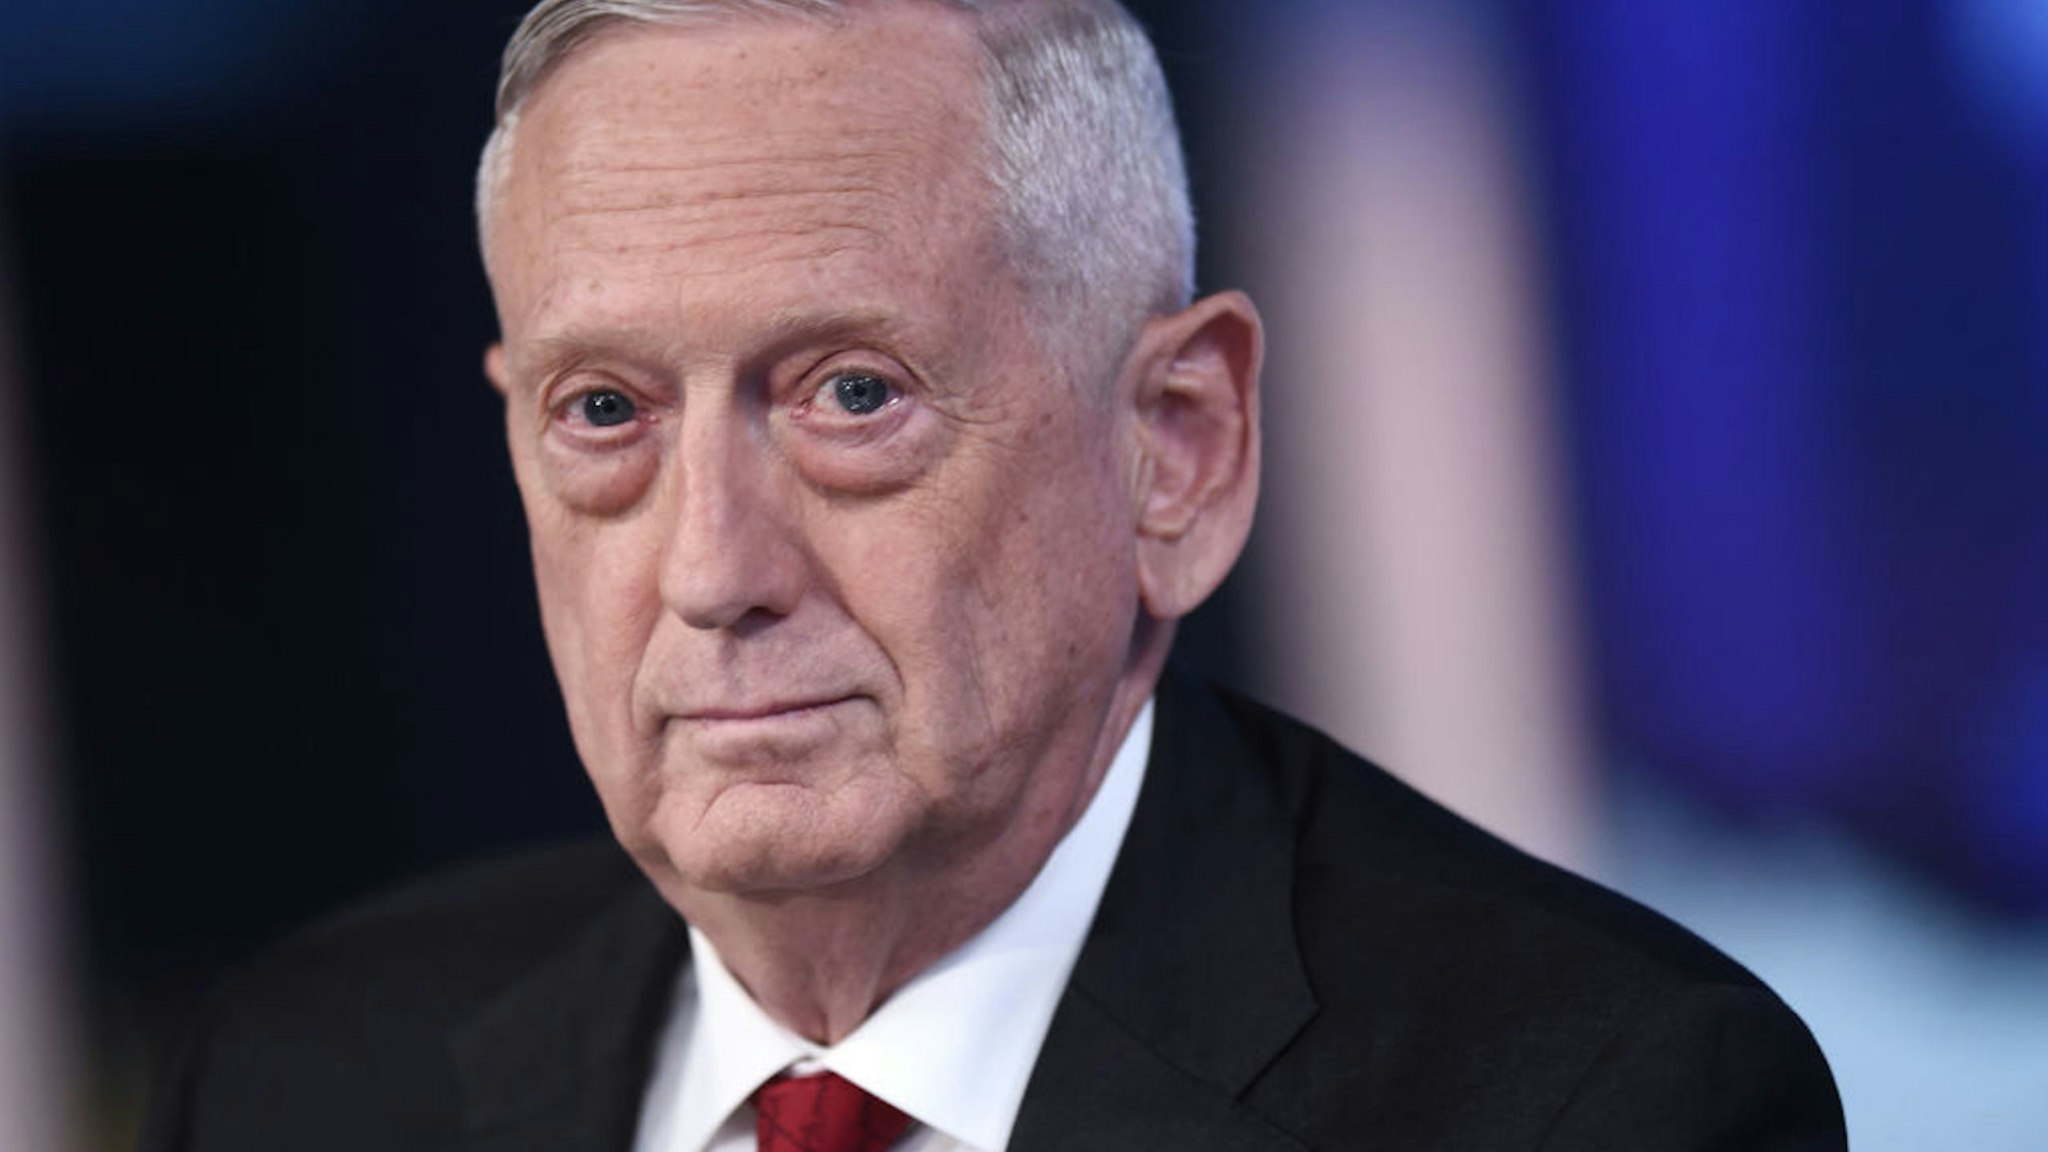 NEW YORK, NEW YORK - SEPTEMBER 03: (EXCLUSIVE COVERAGE) Former U.S. Secretary of Defense James Mattis visits FOX News Channel‚Äôs "The Story with Martha MacCallum" on September 03, 2019 in New York City.